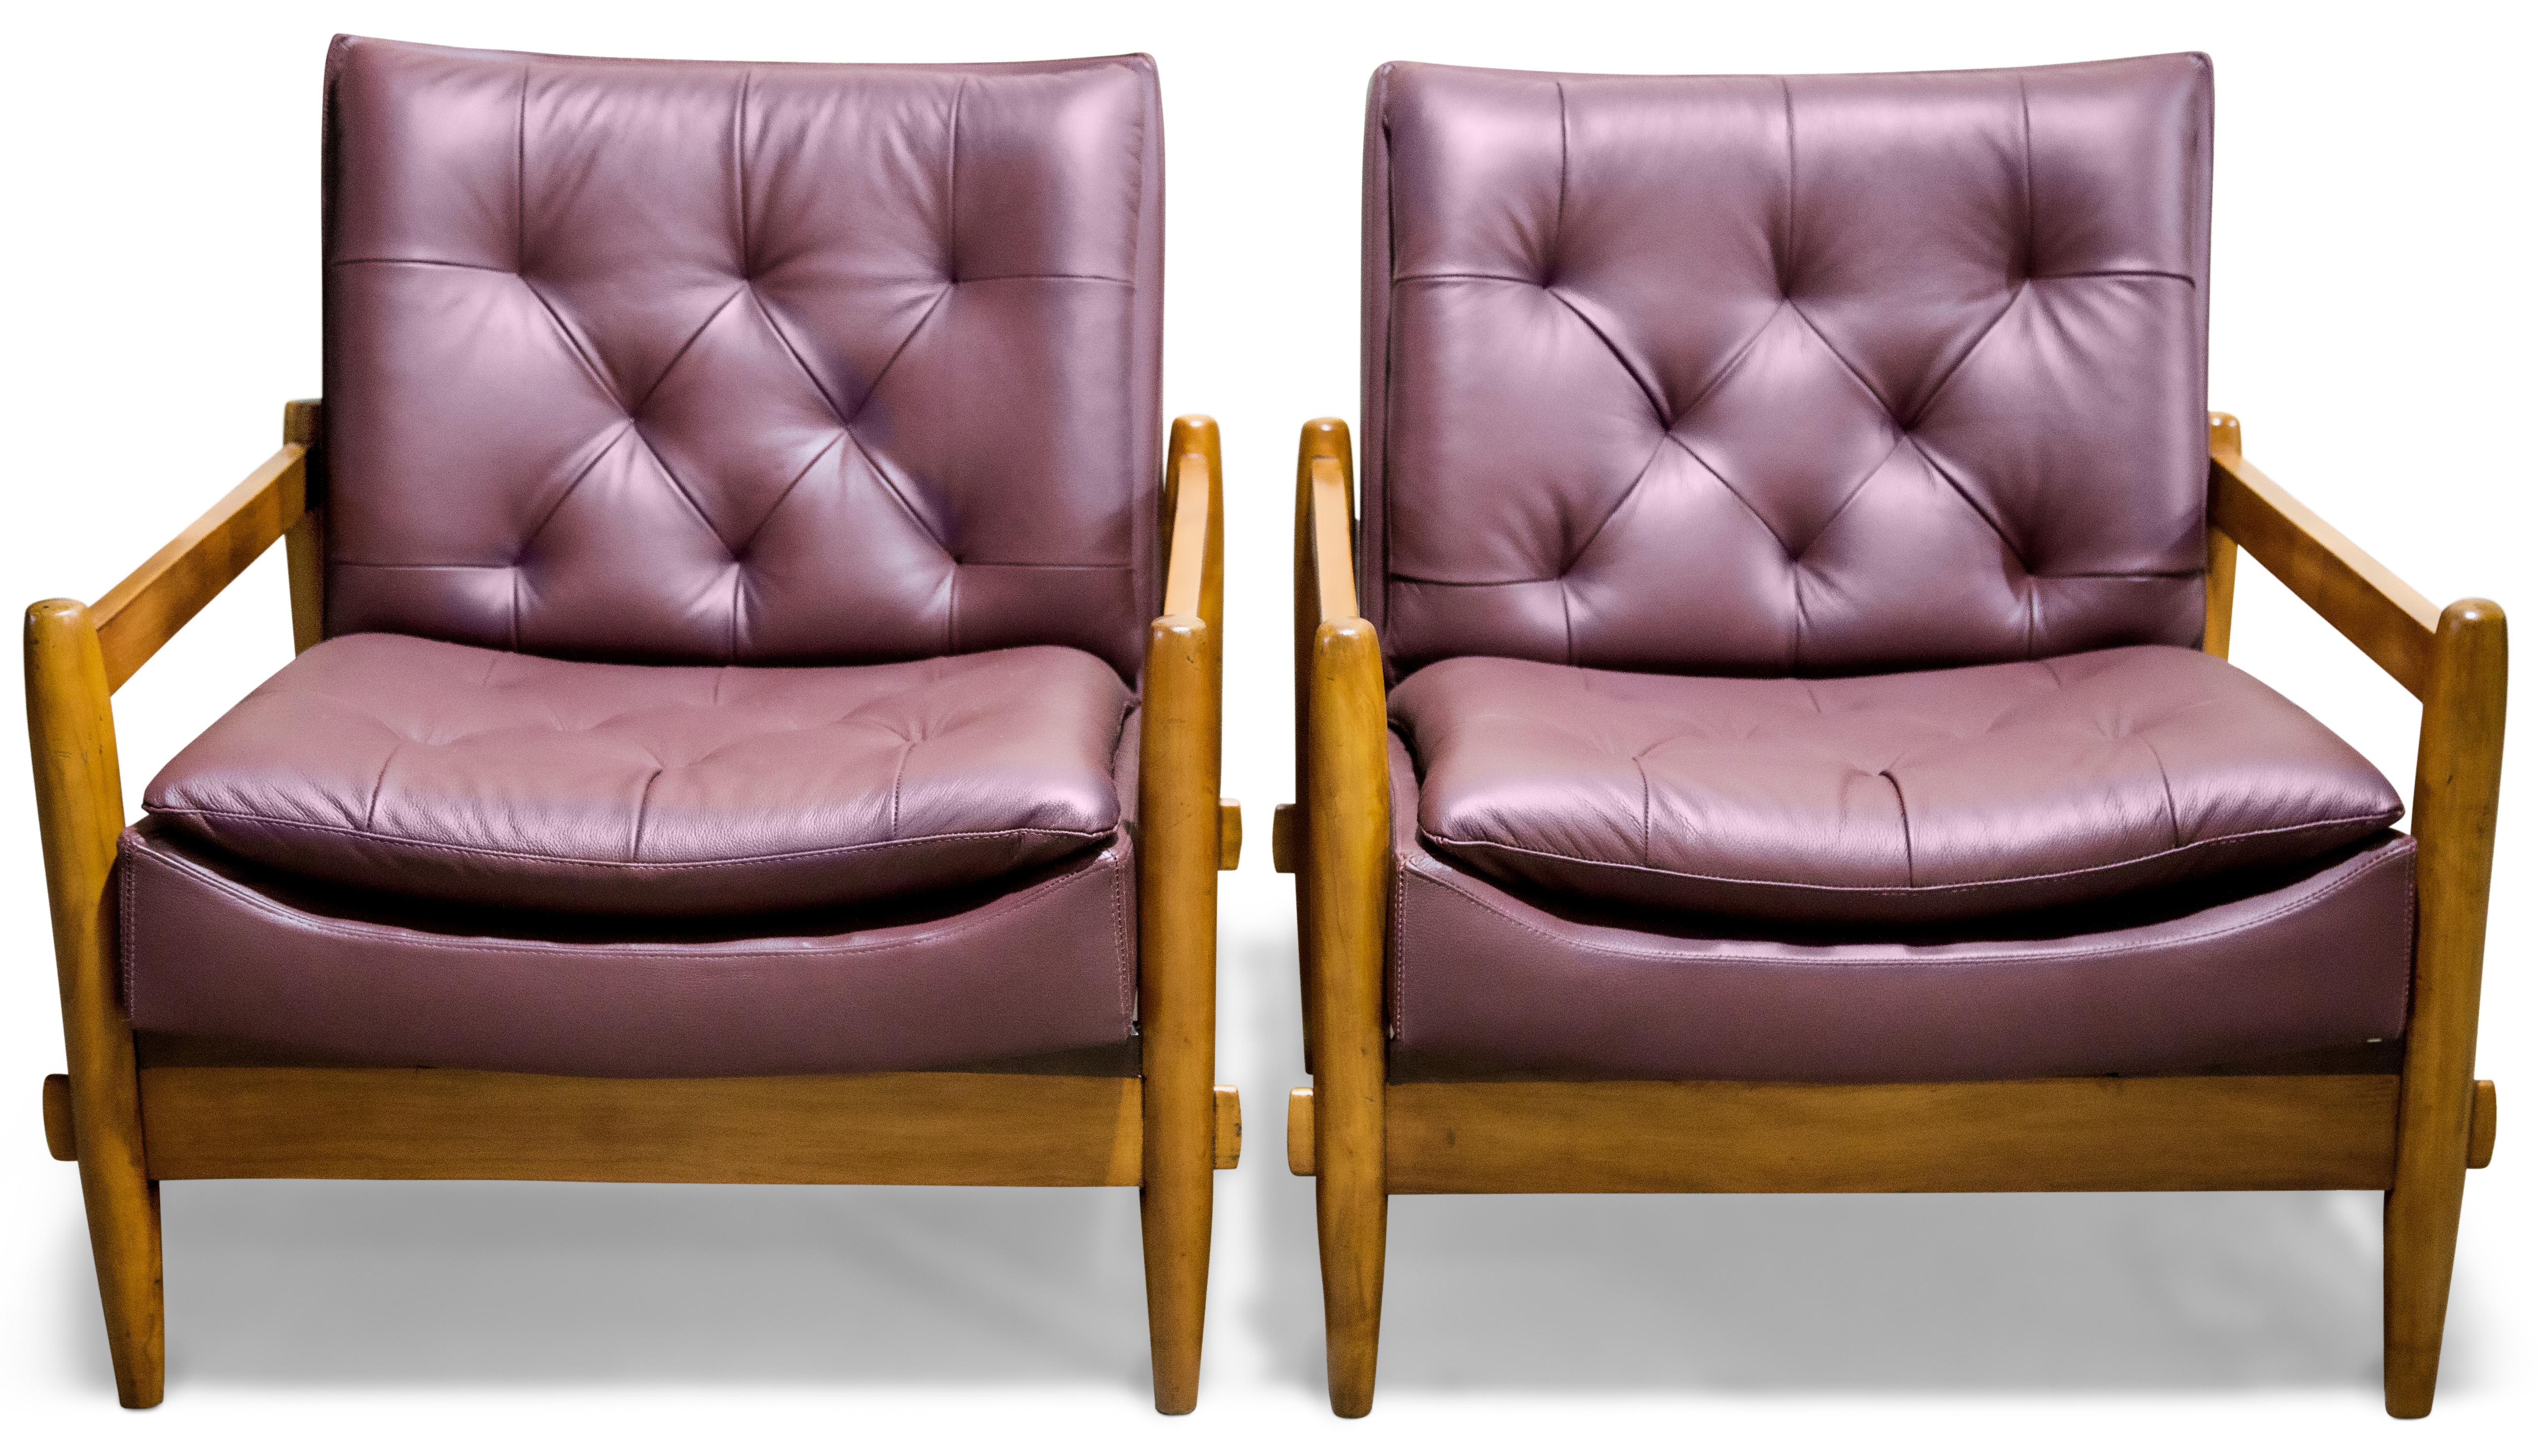 Brazilian Modern Armchair Pair in Purple Leather & Hardwood, Cimo, Brazil, 1960 In Good Condition For Sale In New York, NY